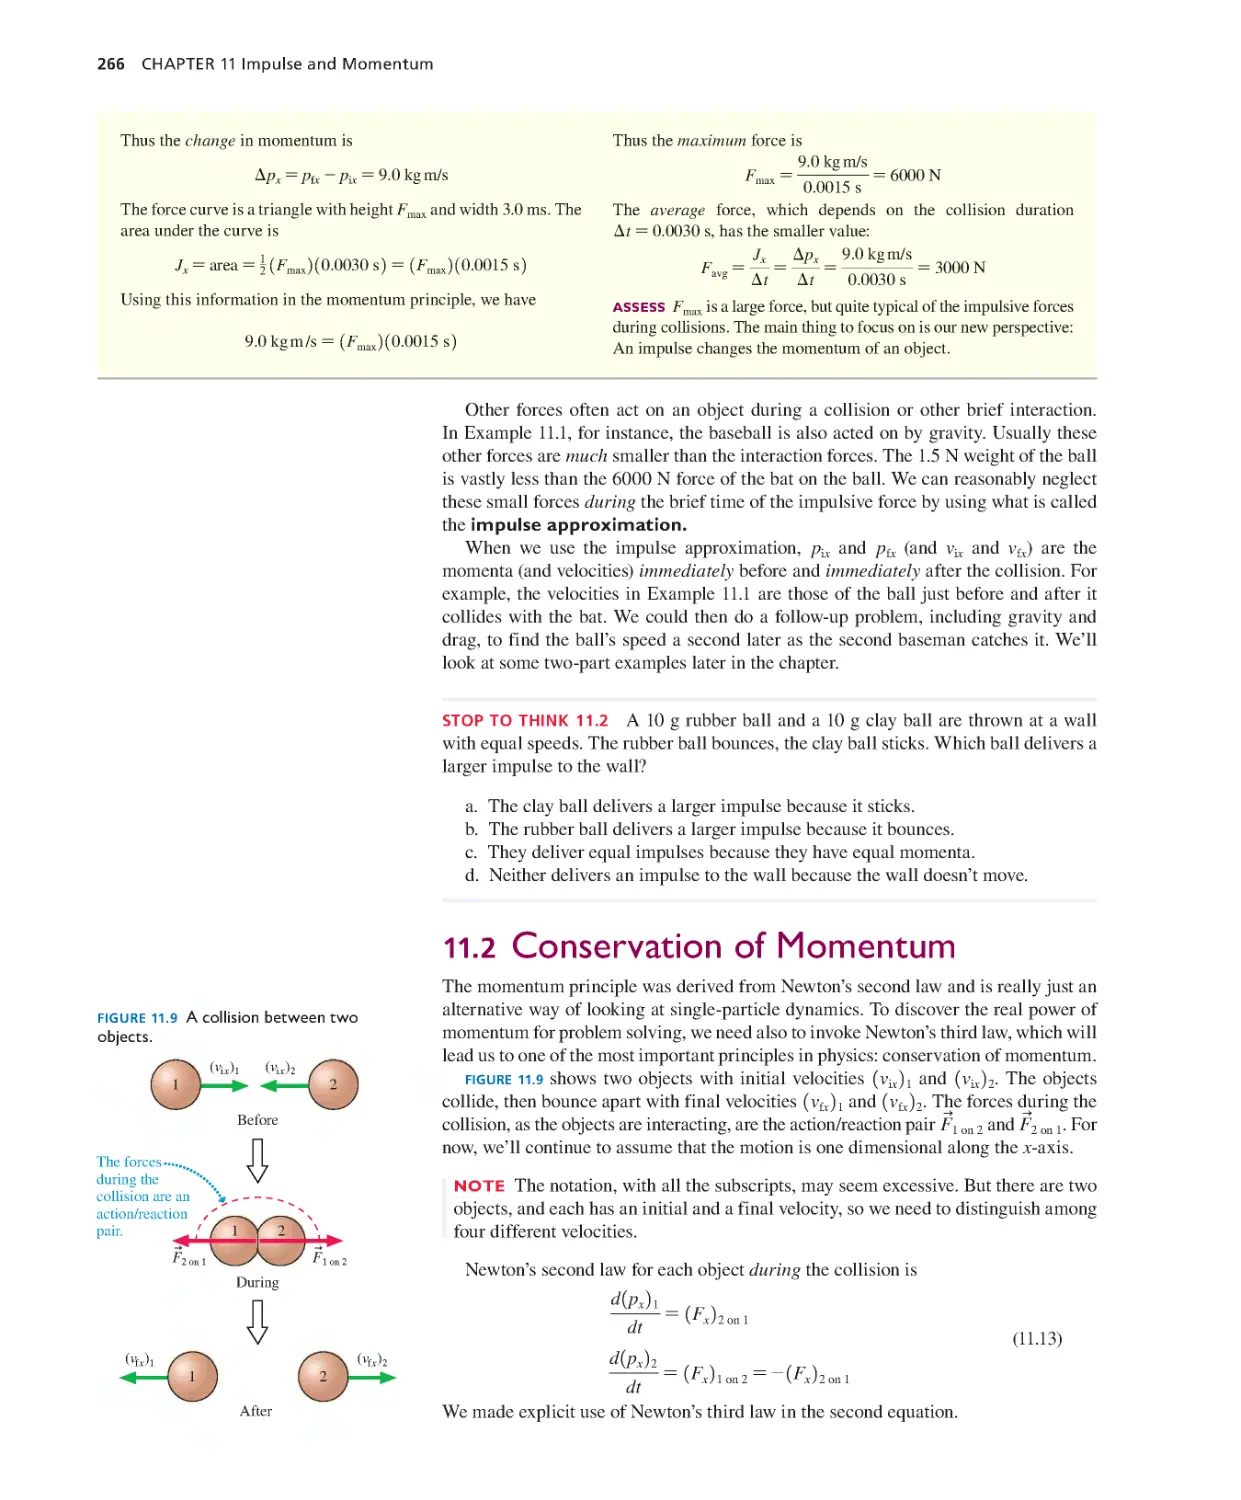 11.2. Conservation of Momentum